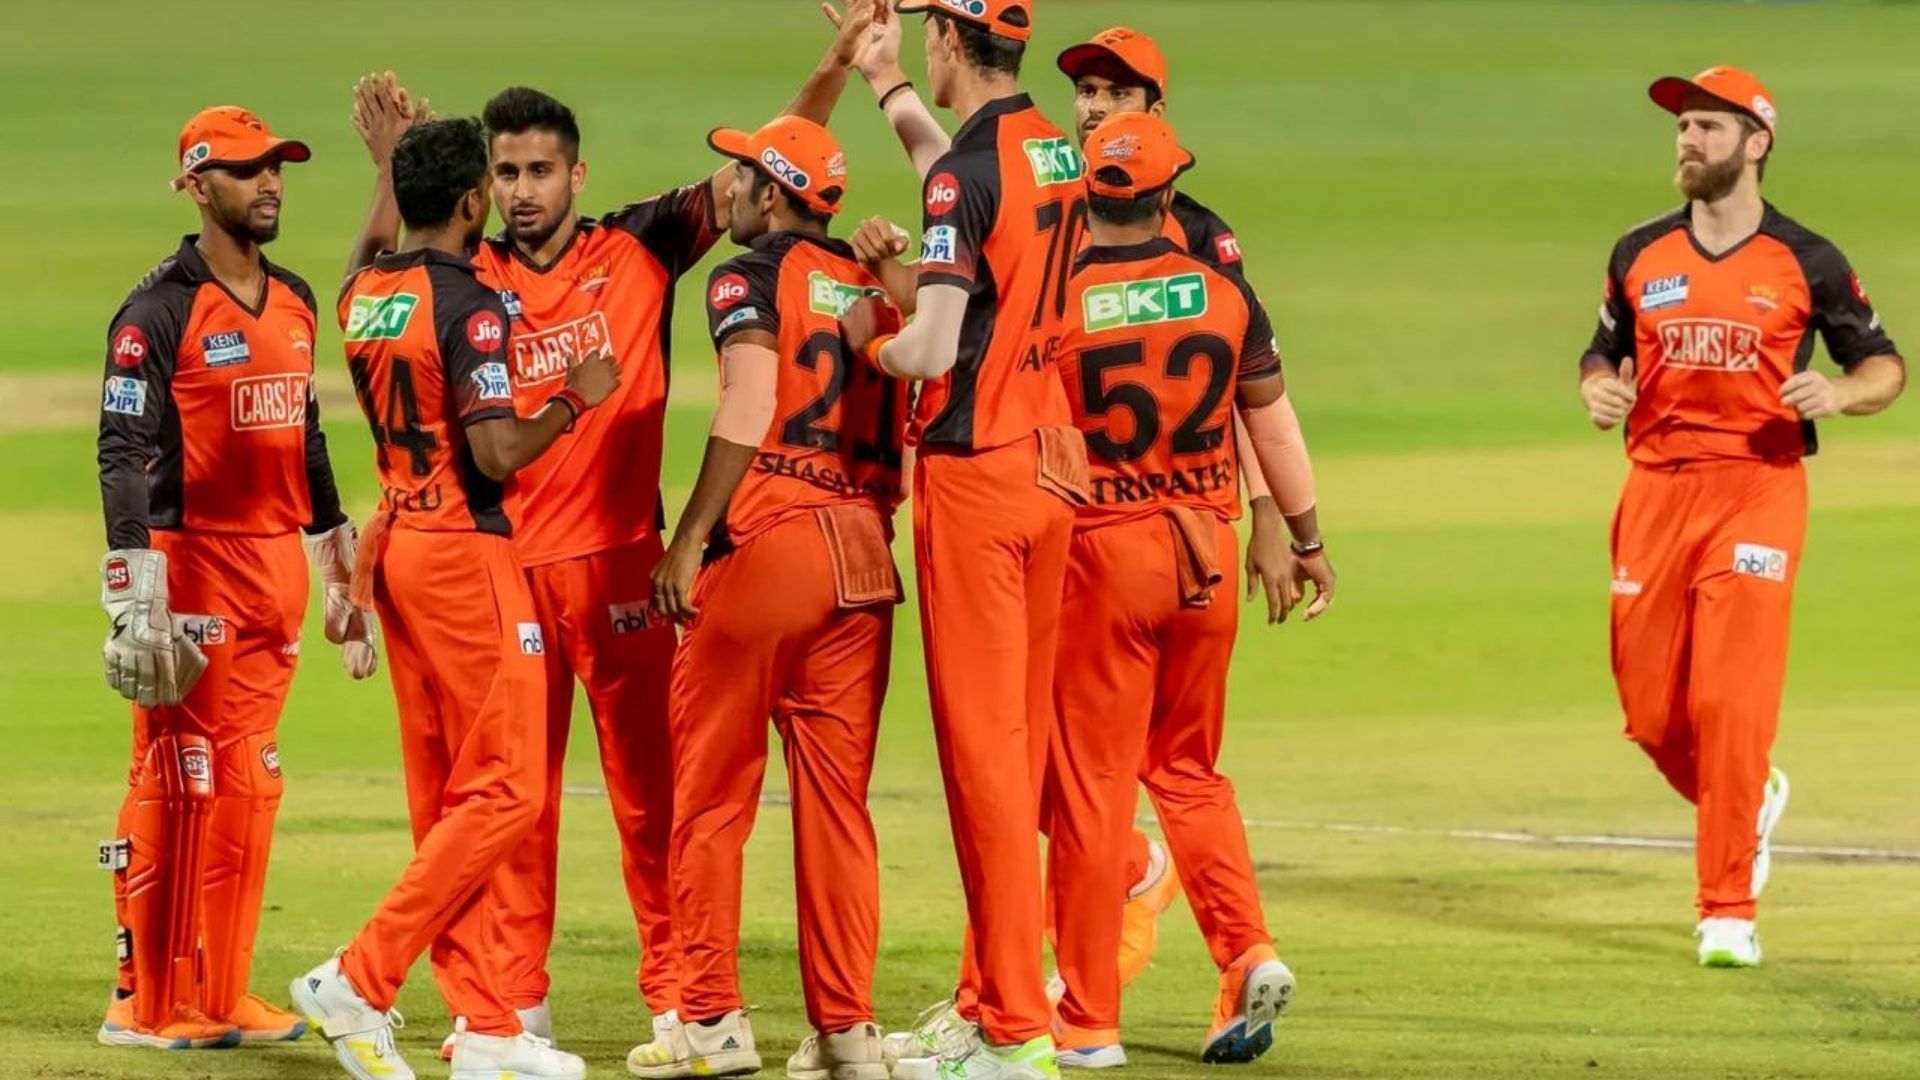 The Sunrisers Hyderabad failed to qualify for the IPL 2022 playoffs. [P/C: iplt20.com]